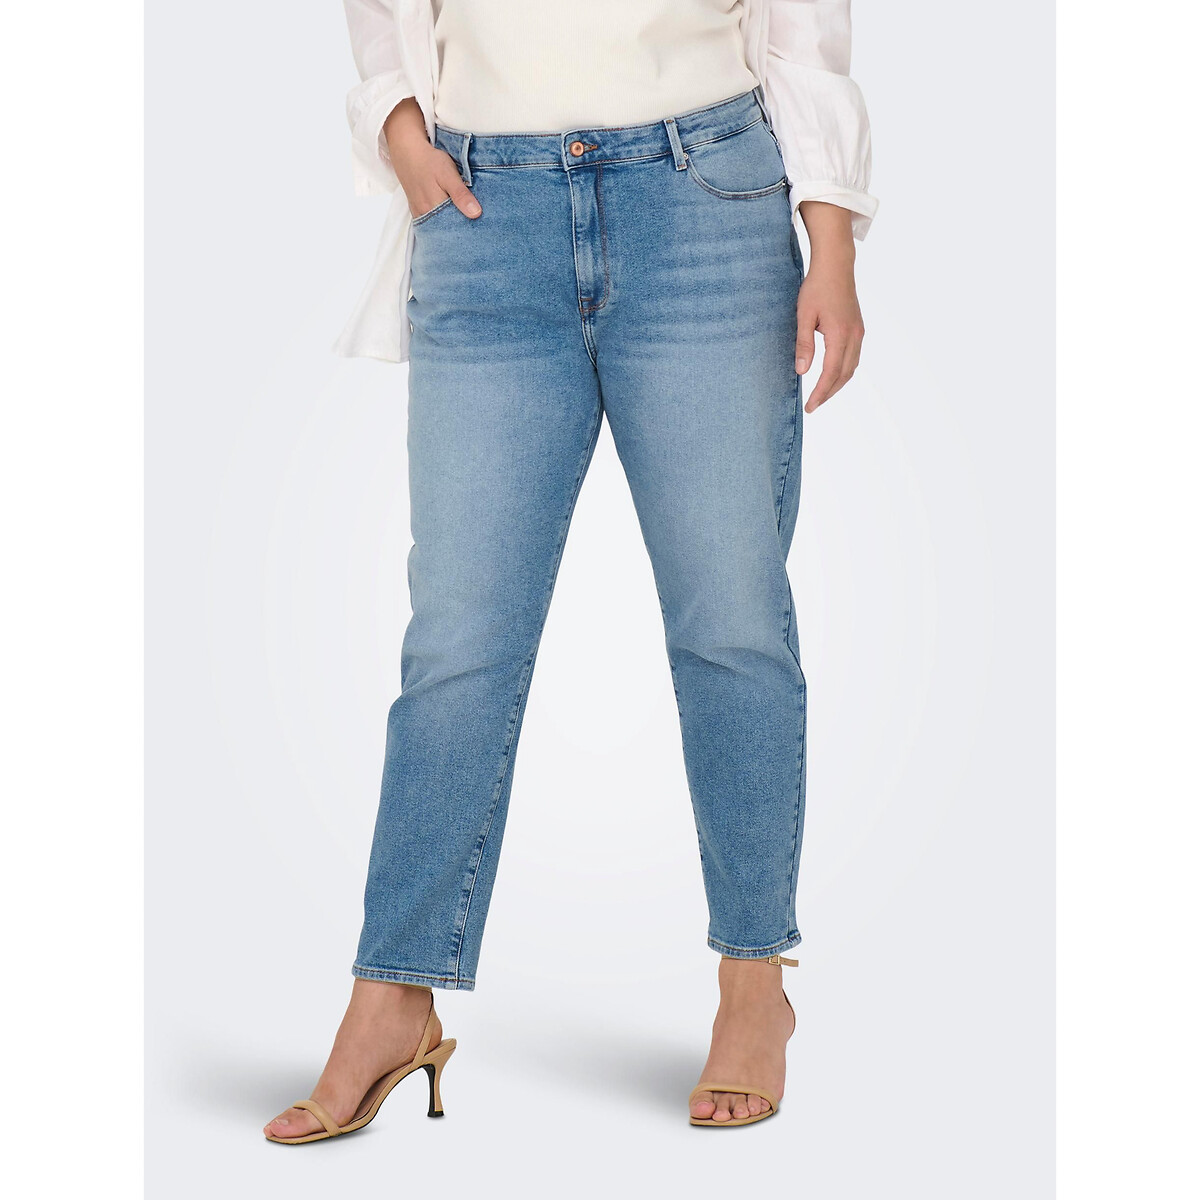 ONLY CARMAKOMA Rechte jeans, hoge taille